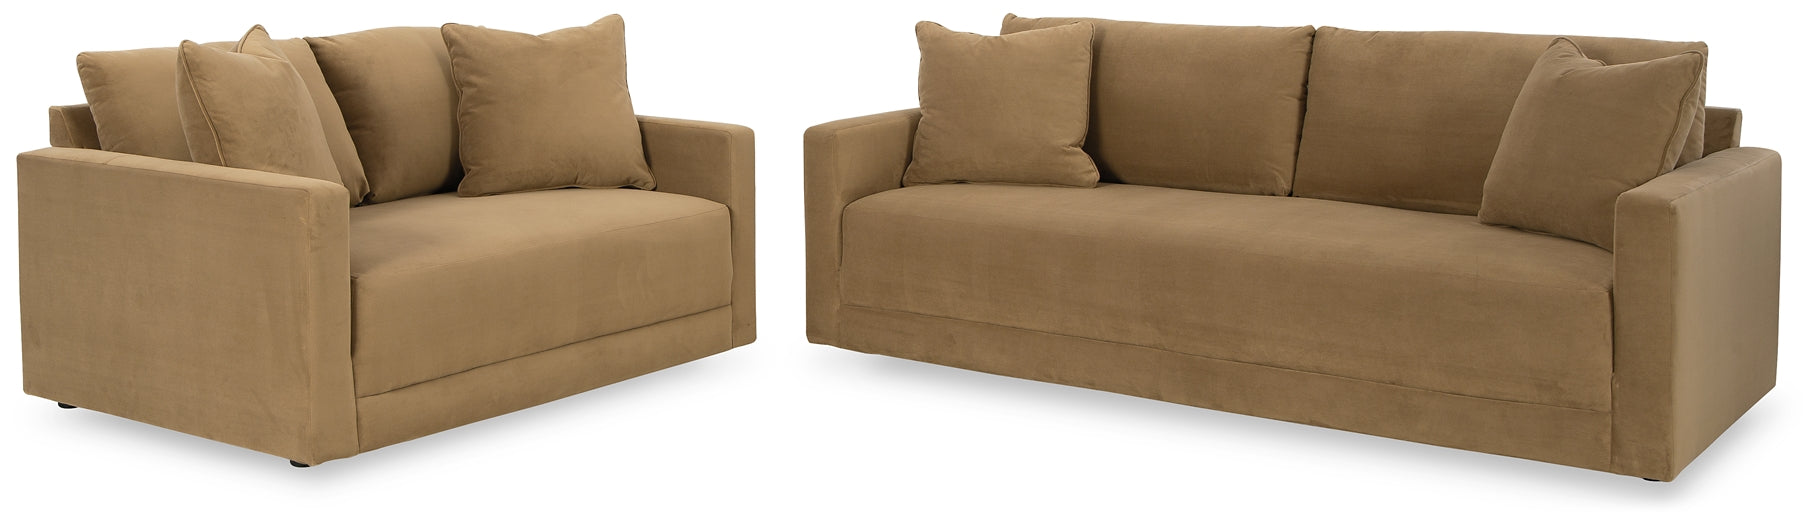 Lainee Sofa and Loveseat